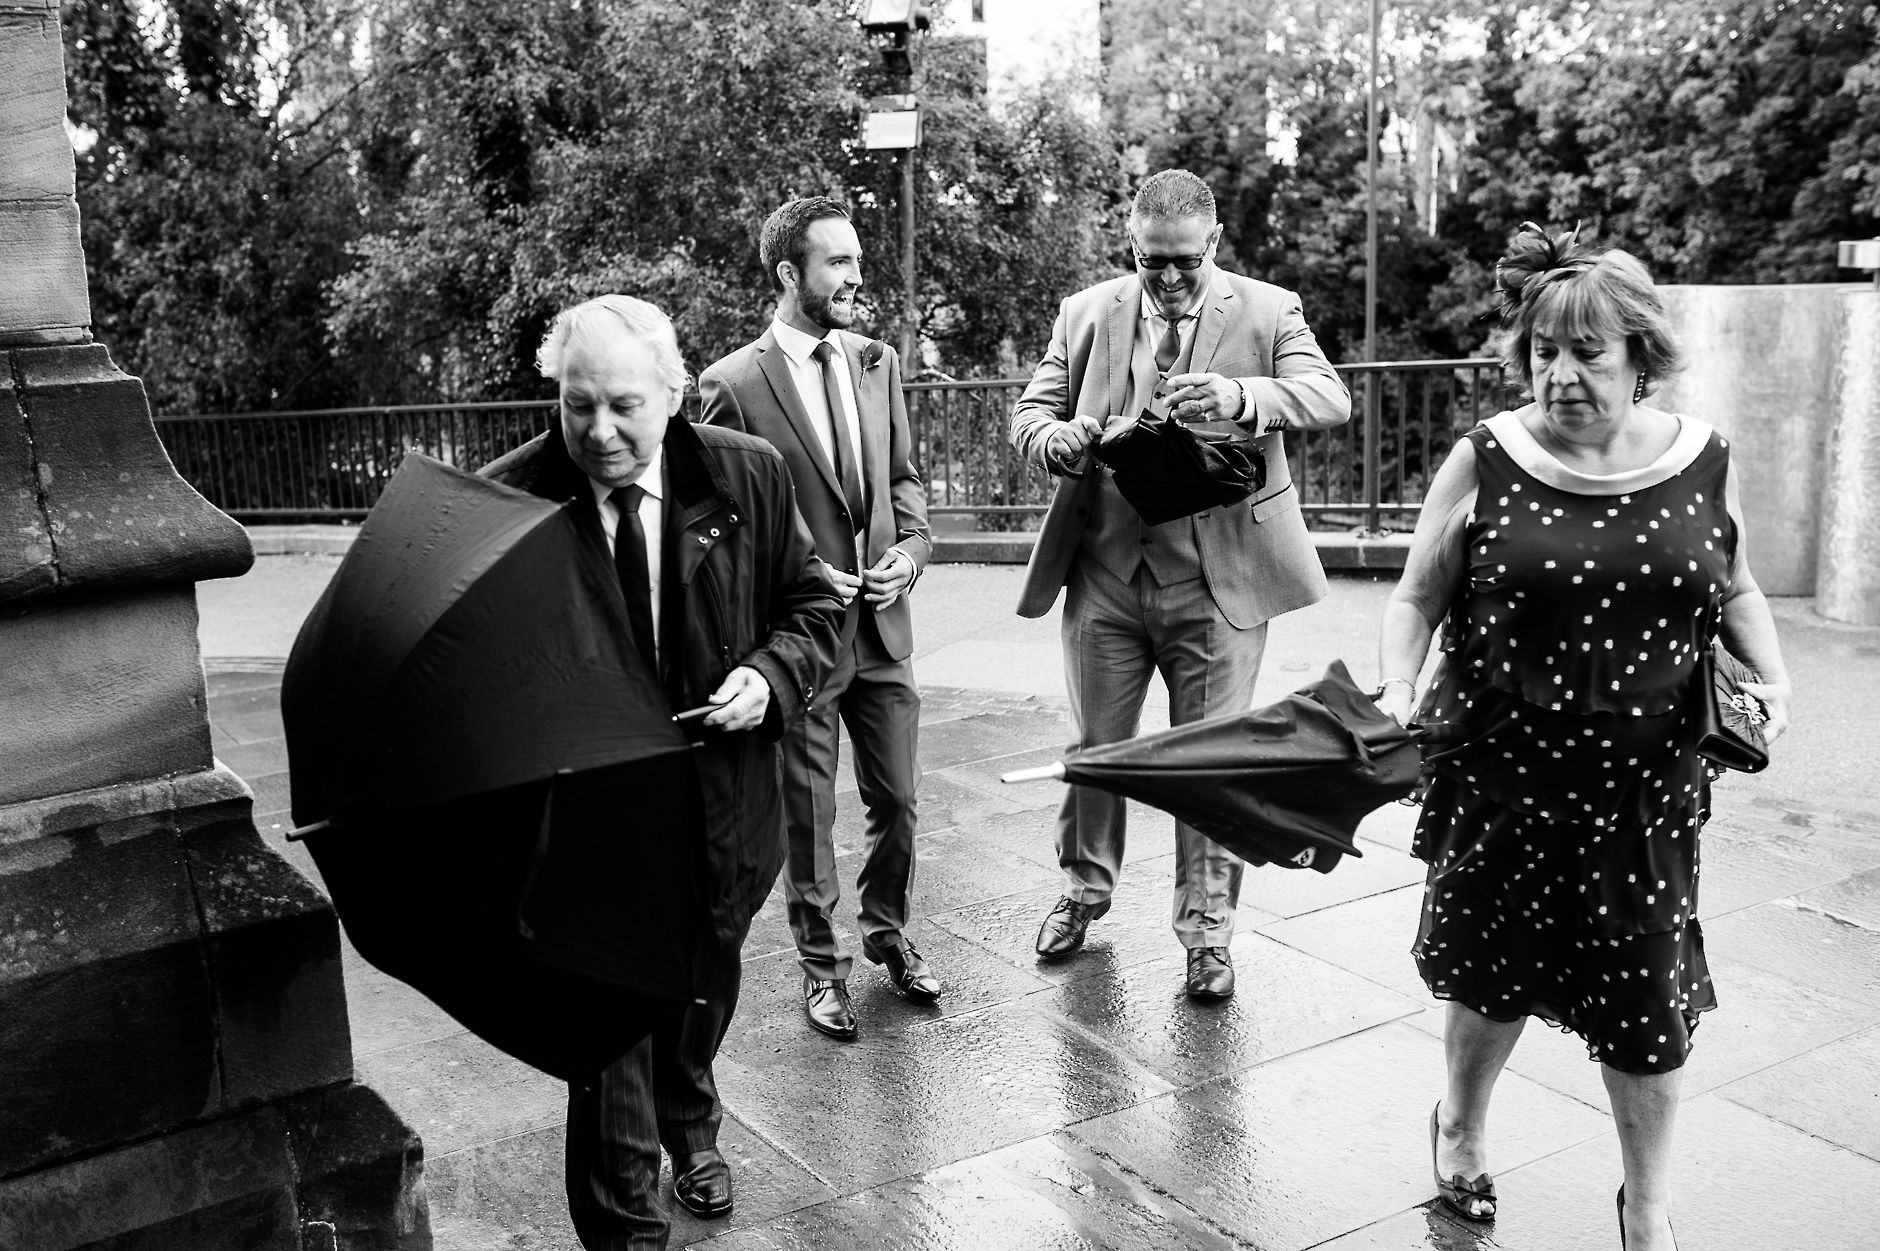 Wedding guests arriving at the church in the rain